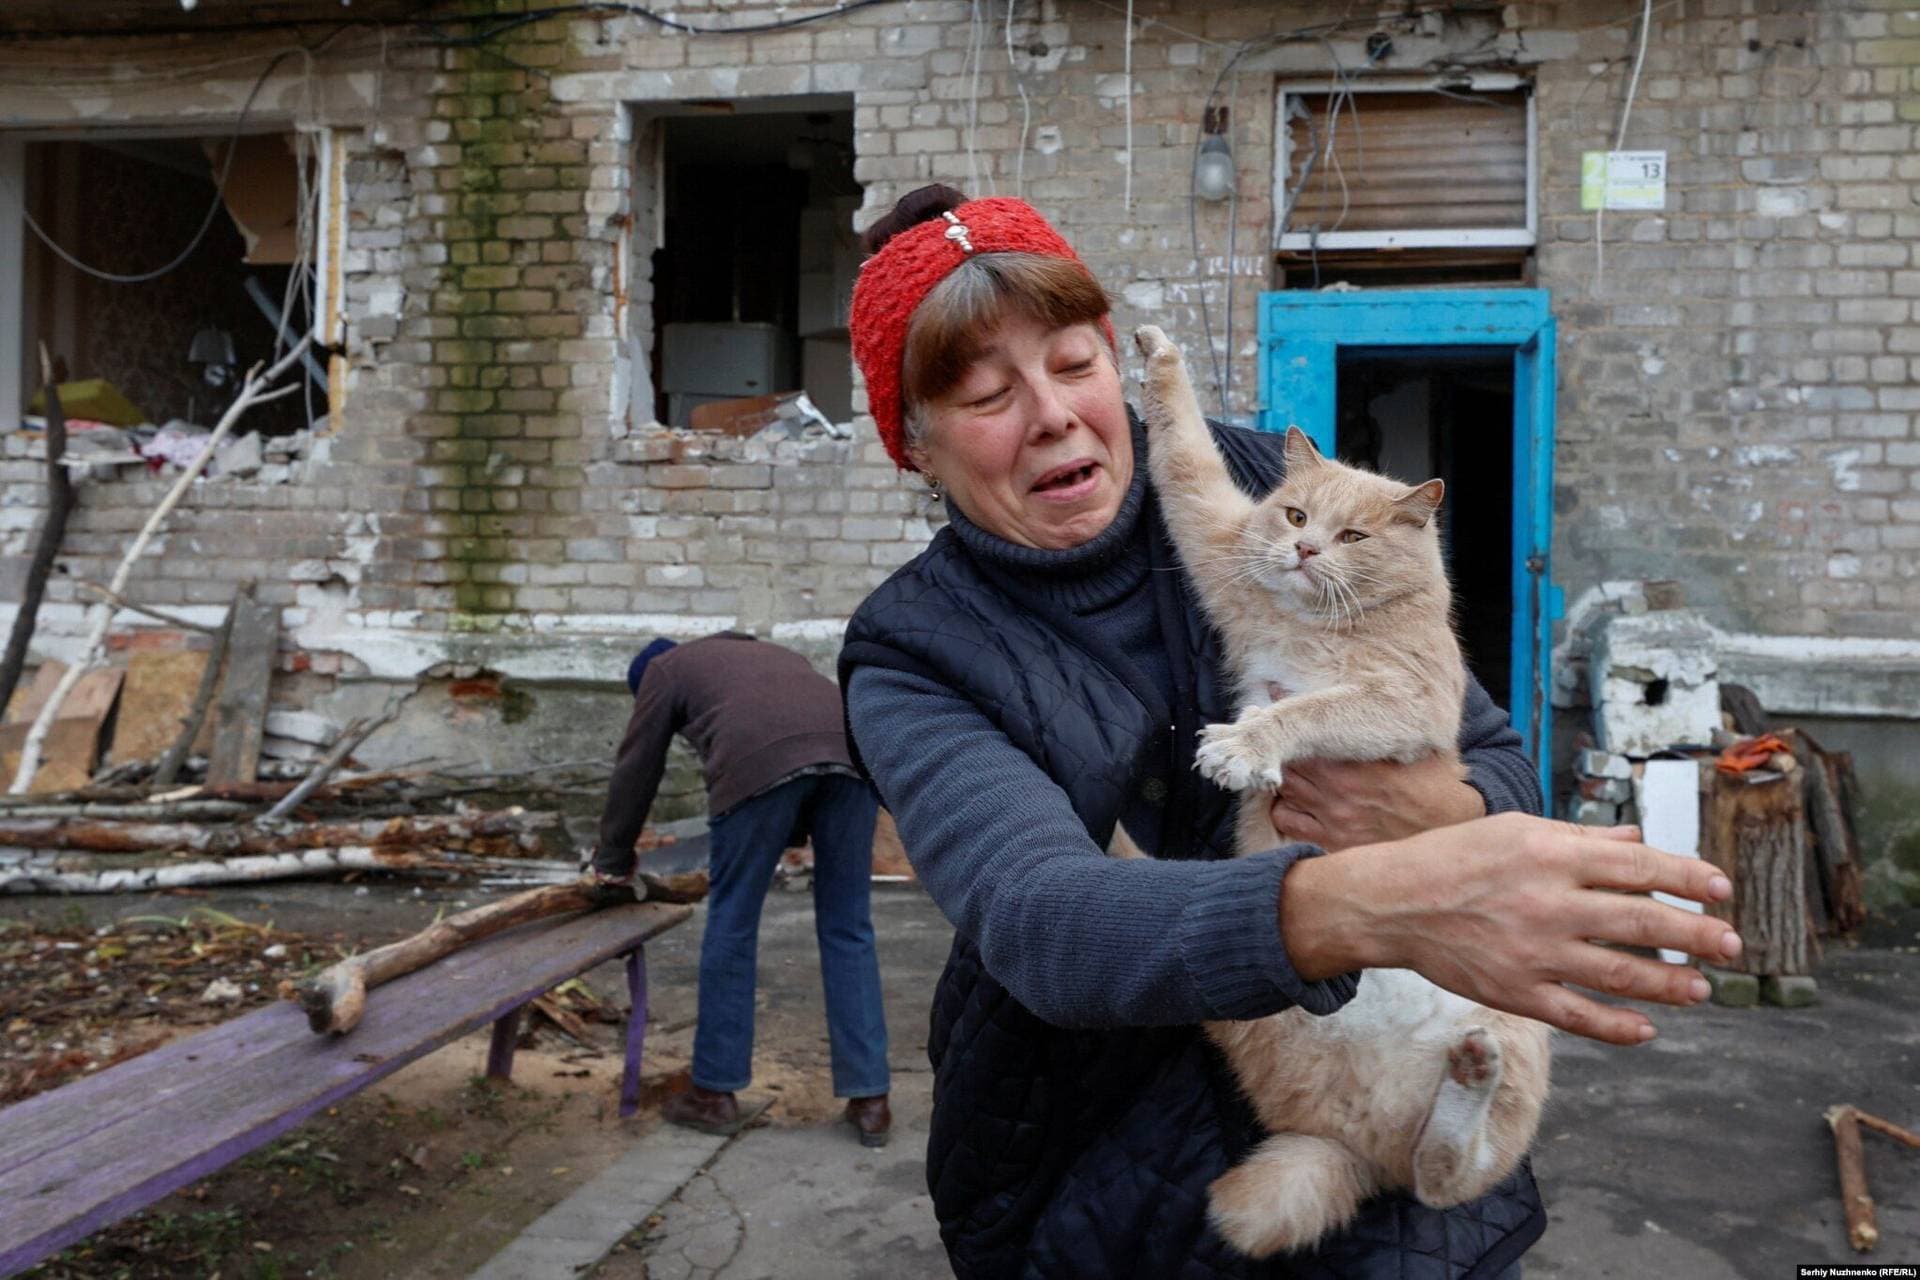 Local resident Rita holds a cat while her neighbor Raisa saws firewood